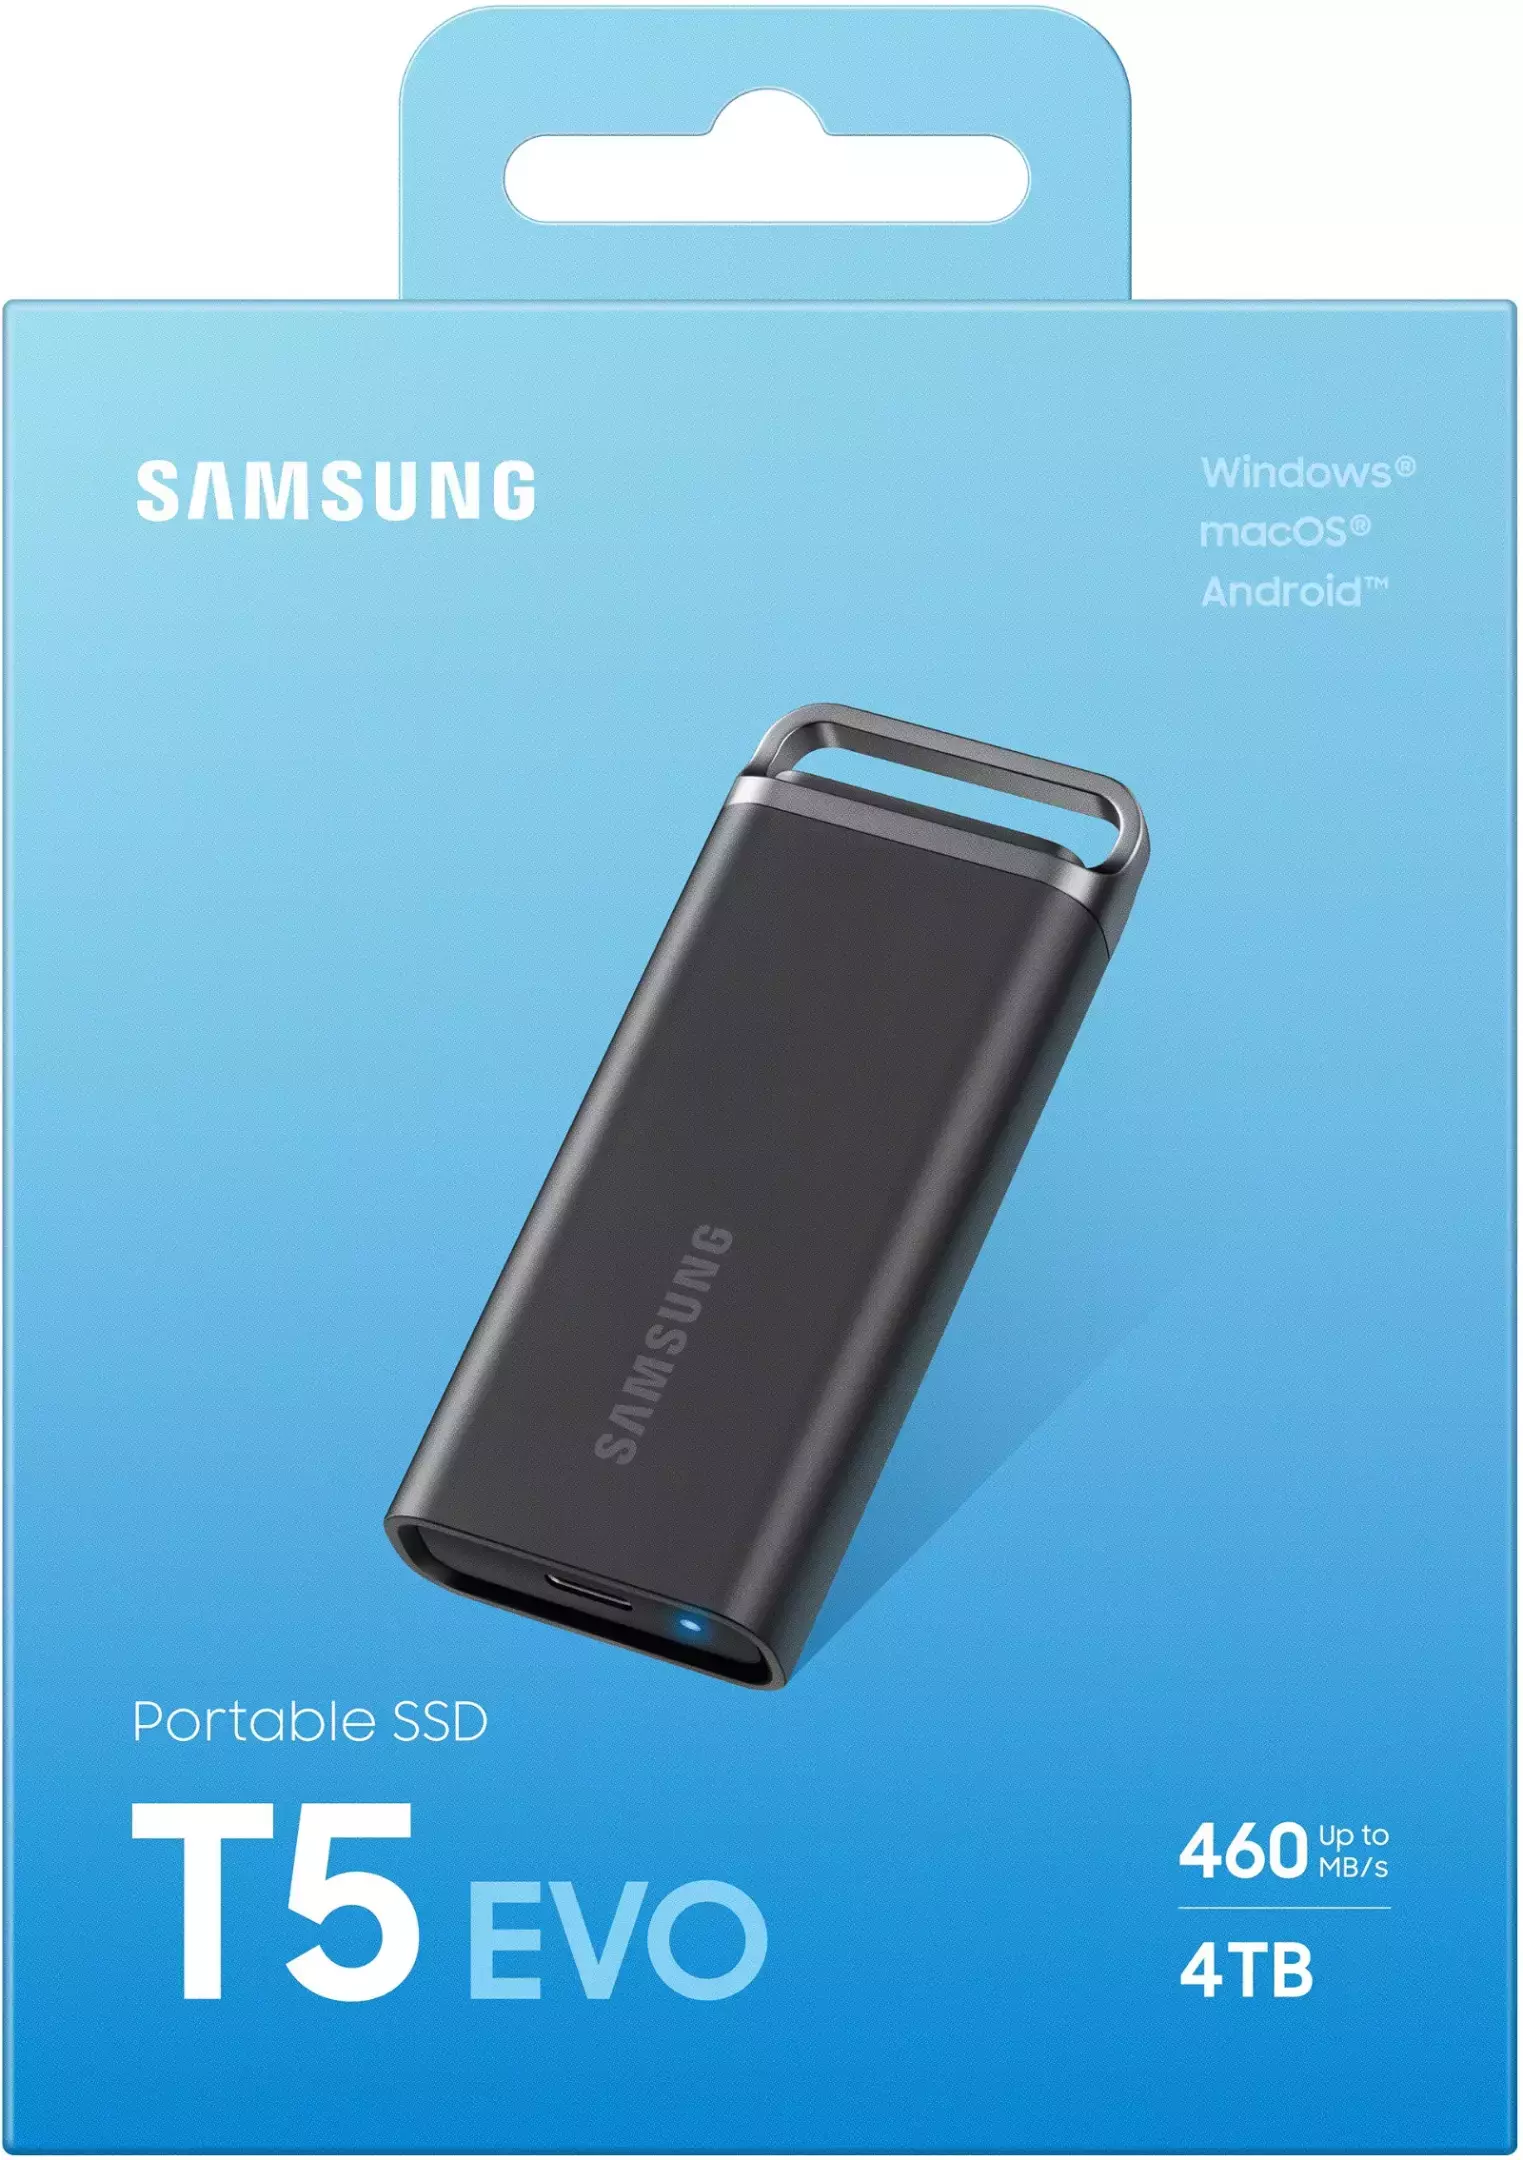 Samsung Unveils New Portable SSD T5 EVO That Offers 8TB Capacity in a  Compact Design